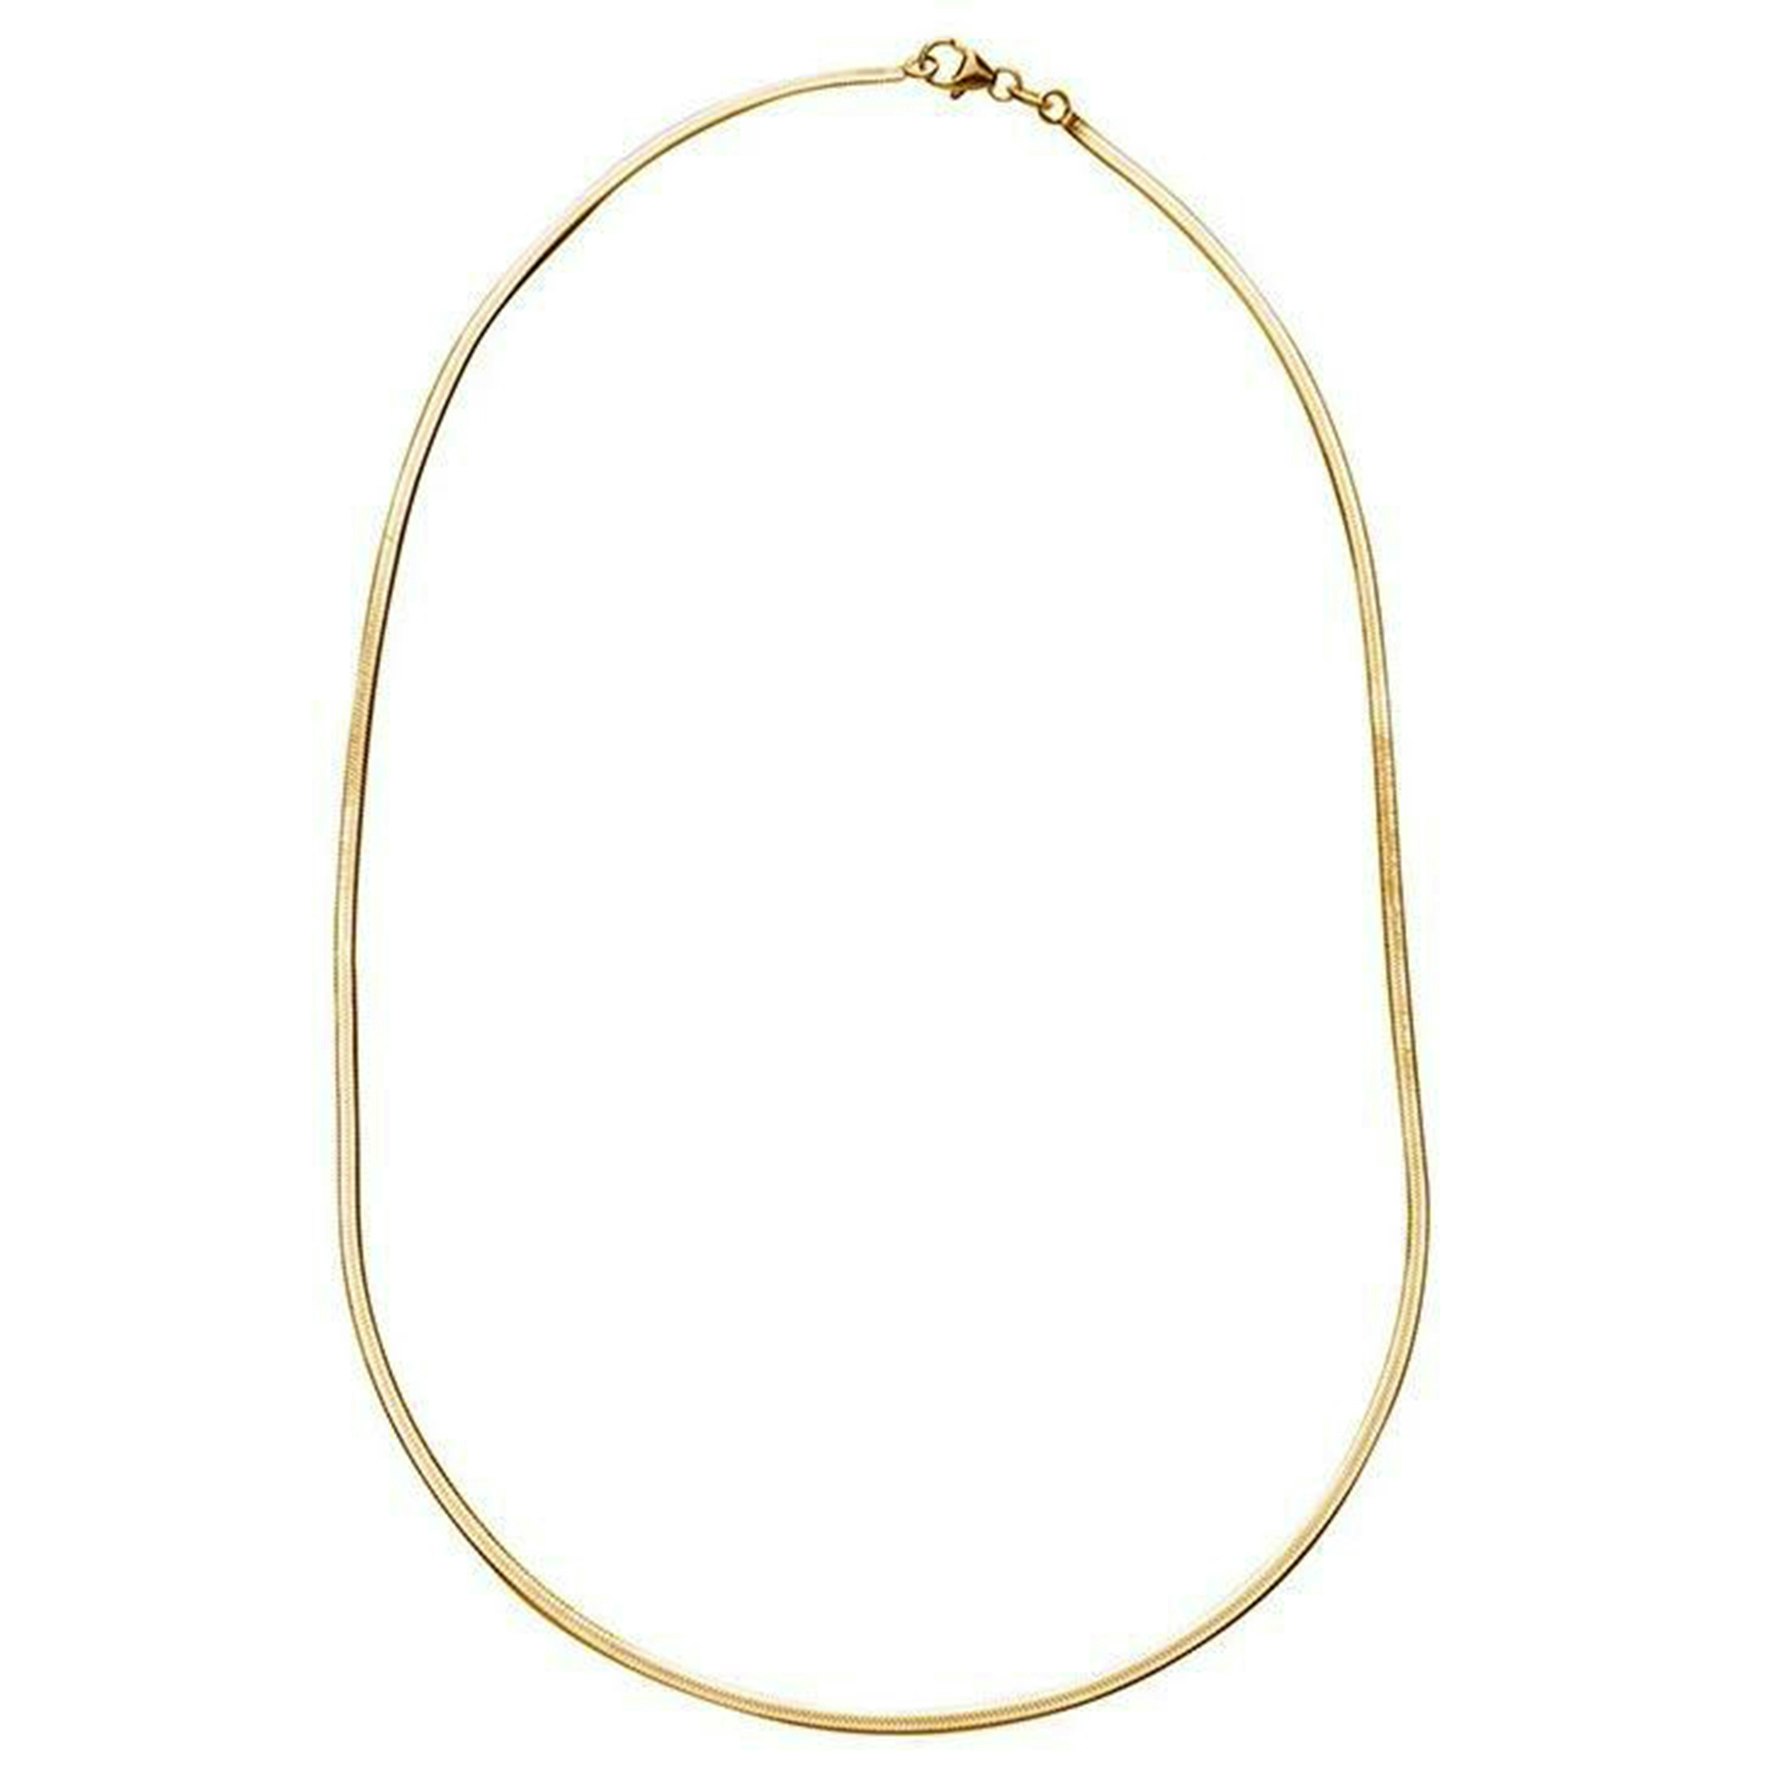 Rylee Necklace from Pico in Goldplated Silver Sterling 925